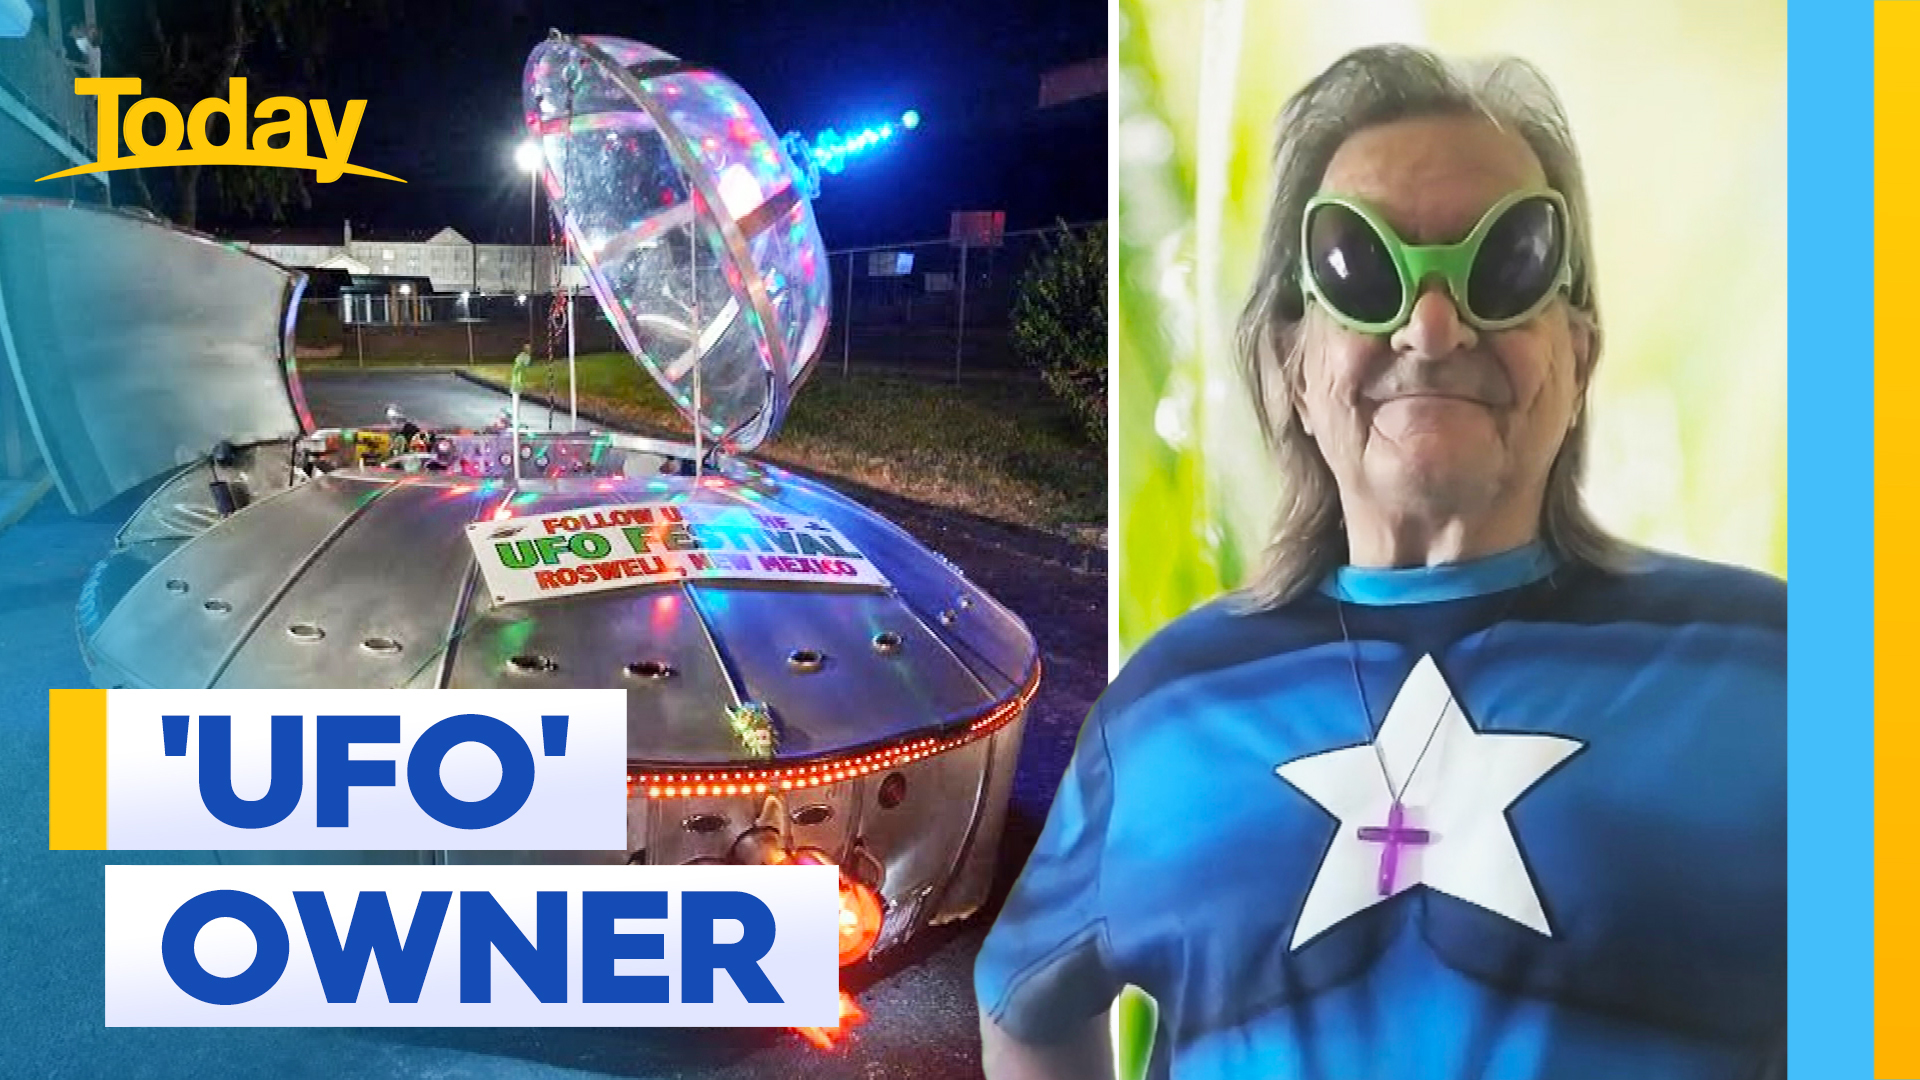 'UFO' owner pulled over multiple times on journey across US